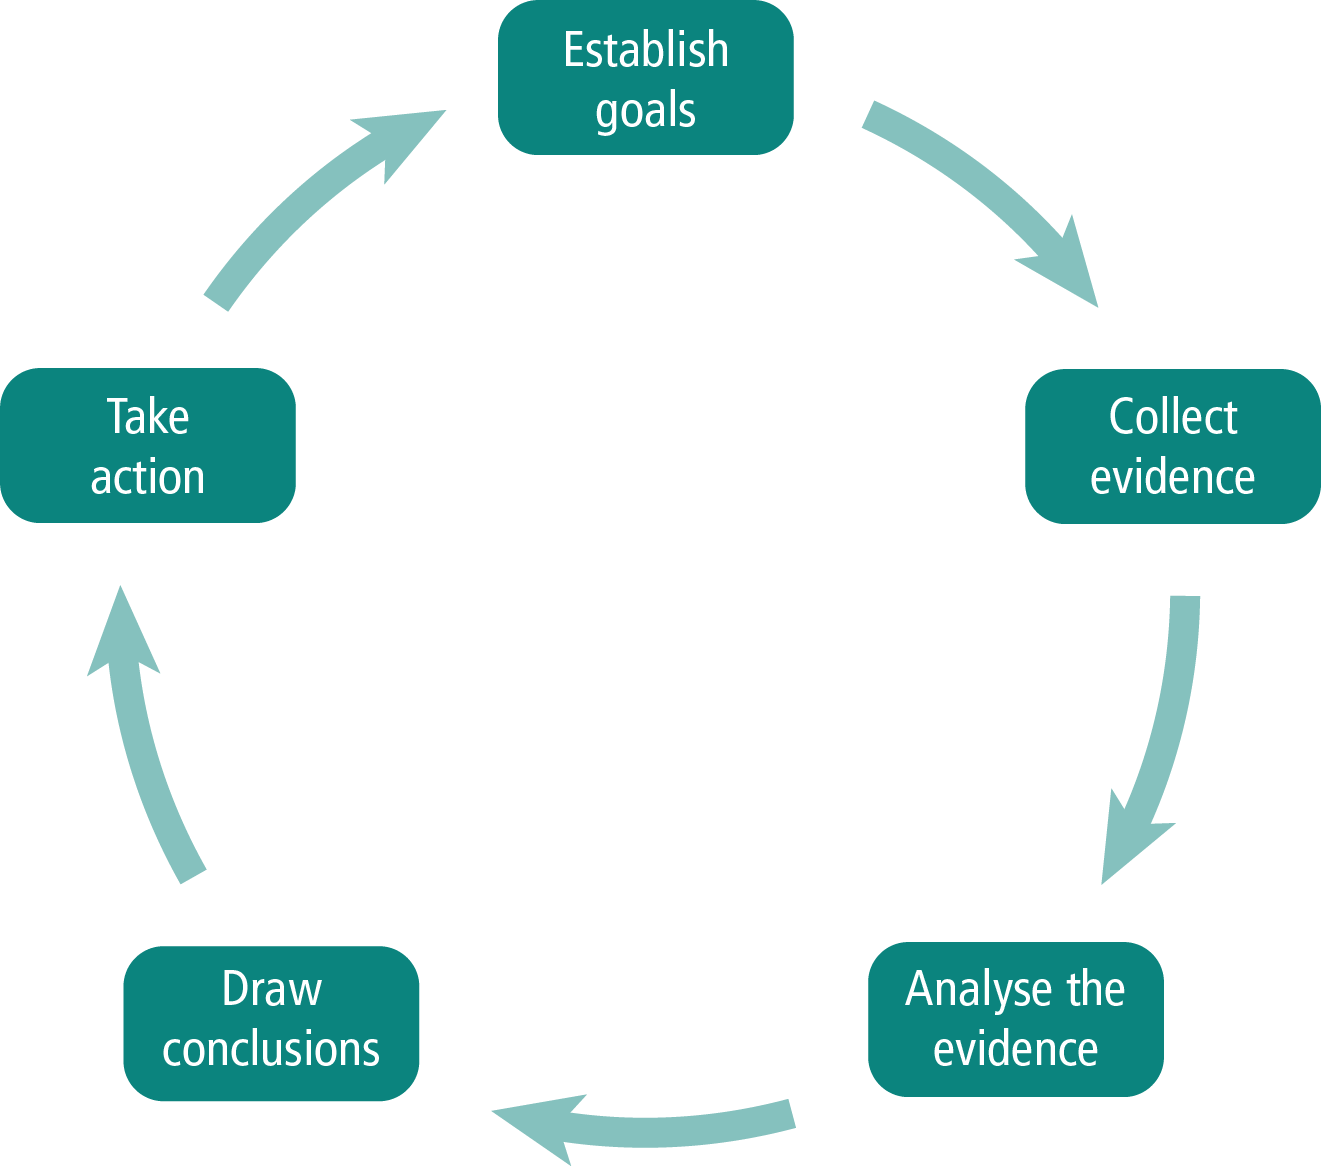 Cyclical diagram showing monitoring and evaluation process to establish goals, collect and analyse evidence, draw conclusions and take action